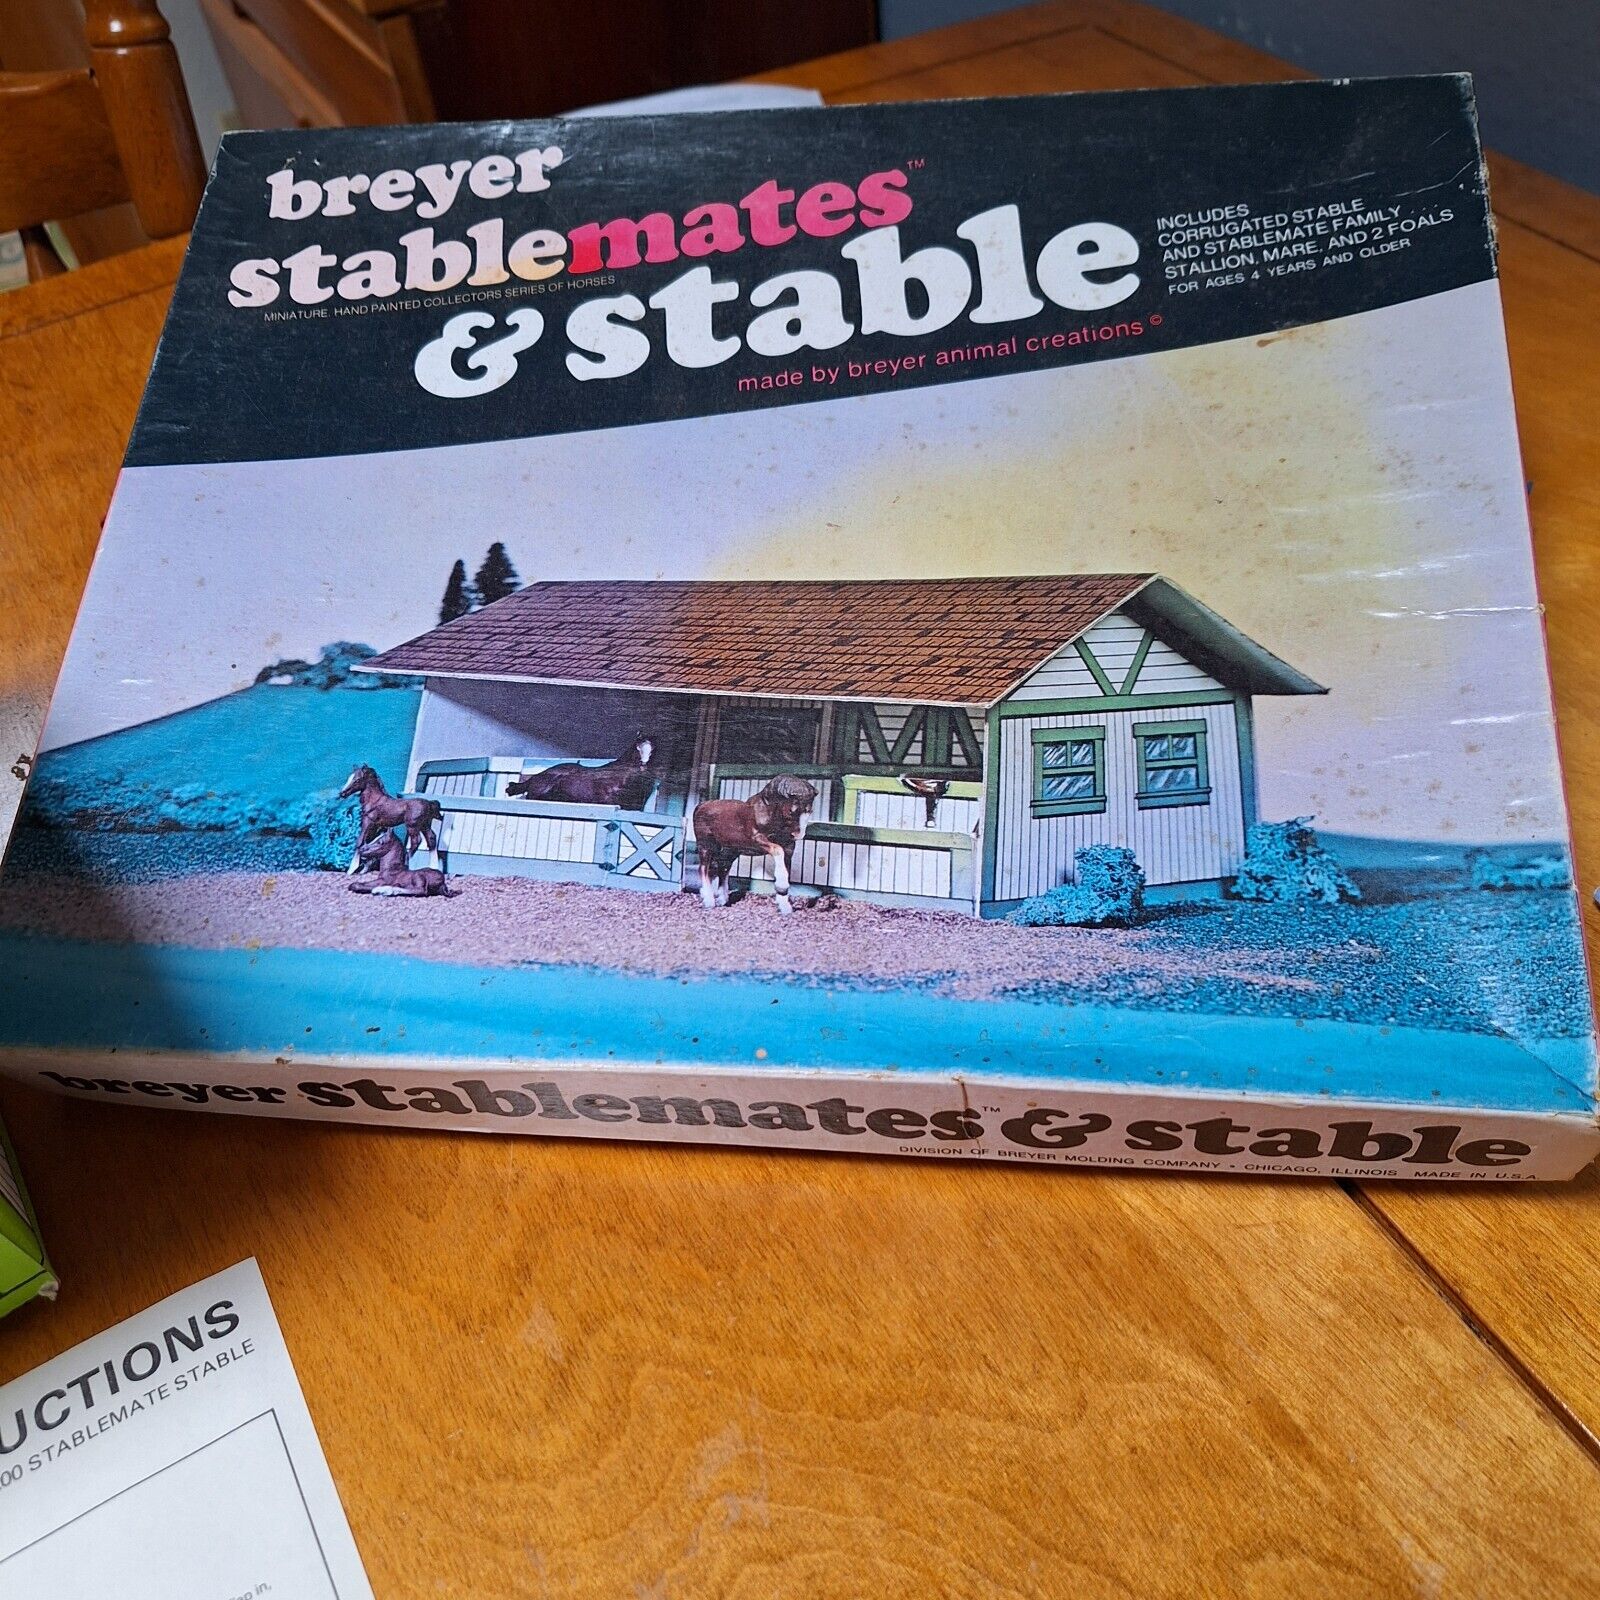 Vintage Breyer Stablemate Stable 1976 BARN ONLY #3085 w/ Box and Instructions